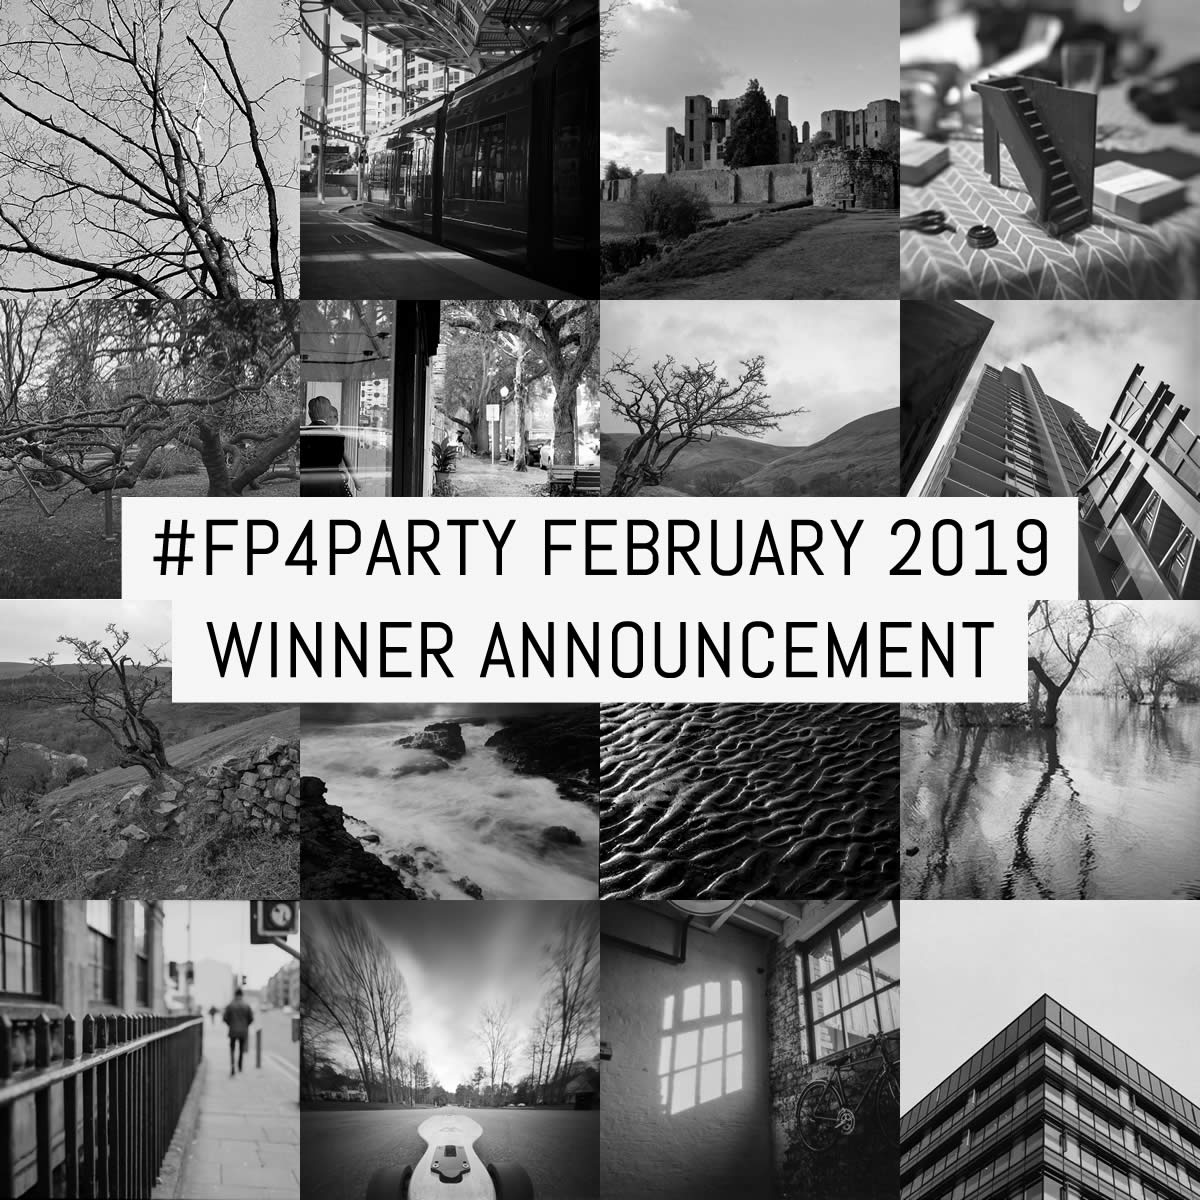 #FP4party February 2019 winner announcement